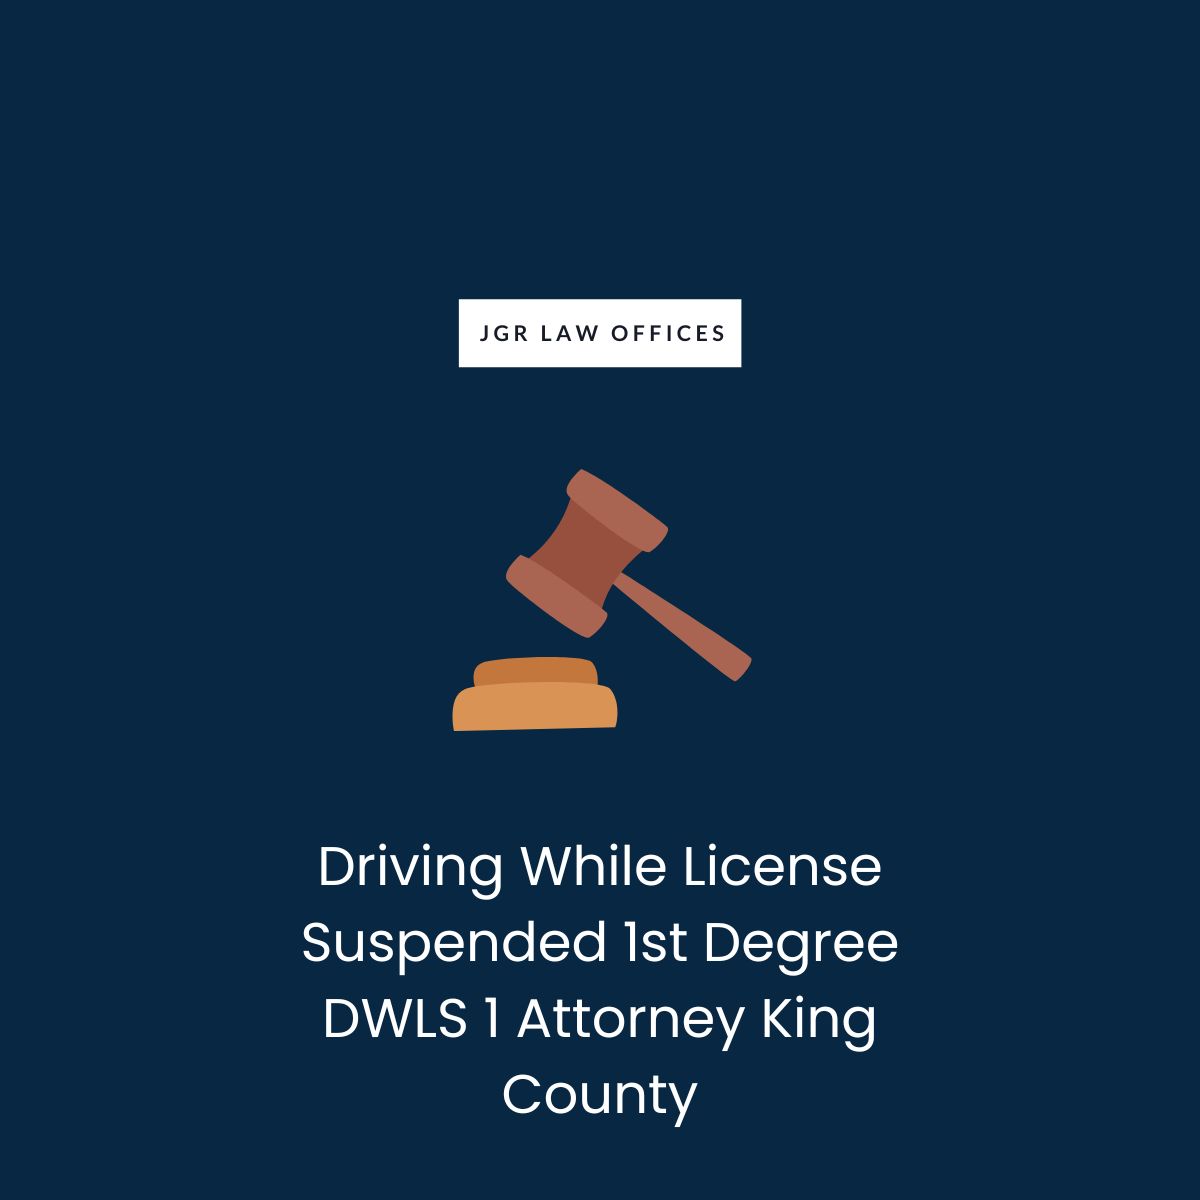 Driving While License Suspended 1st Degree DWLS 1 Attorney King County